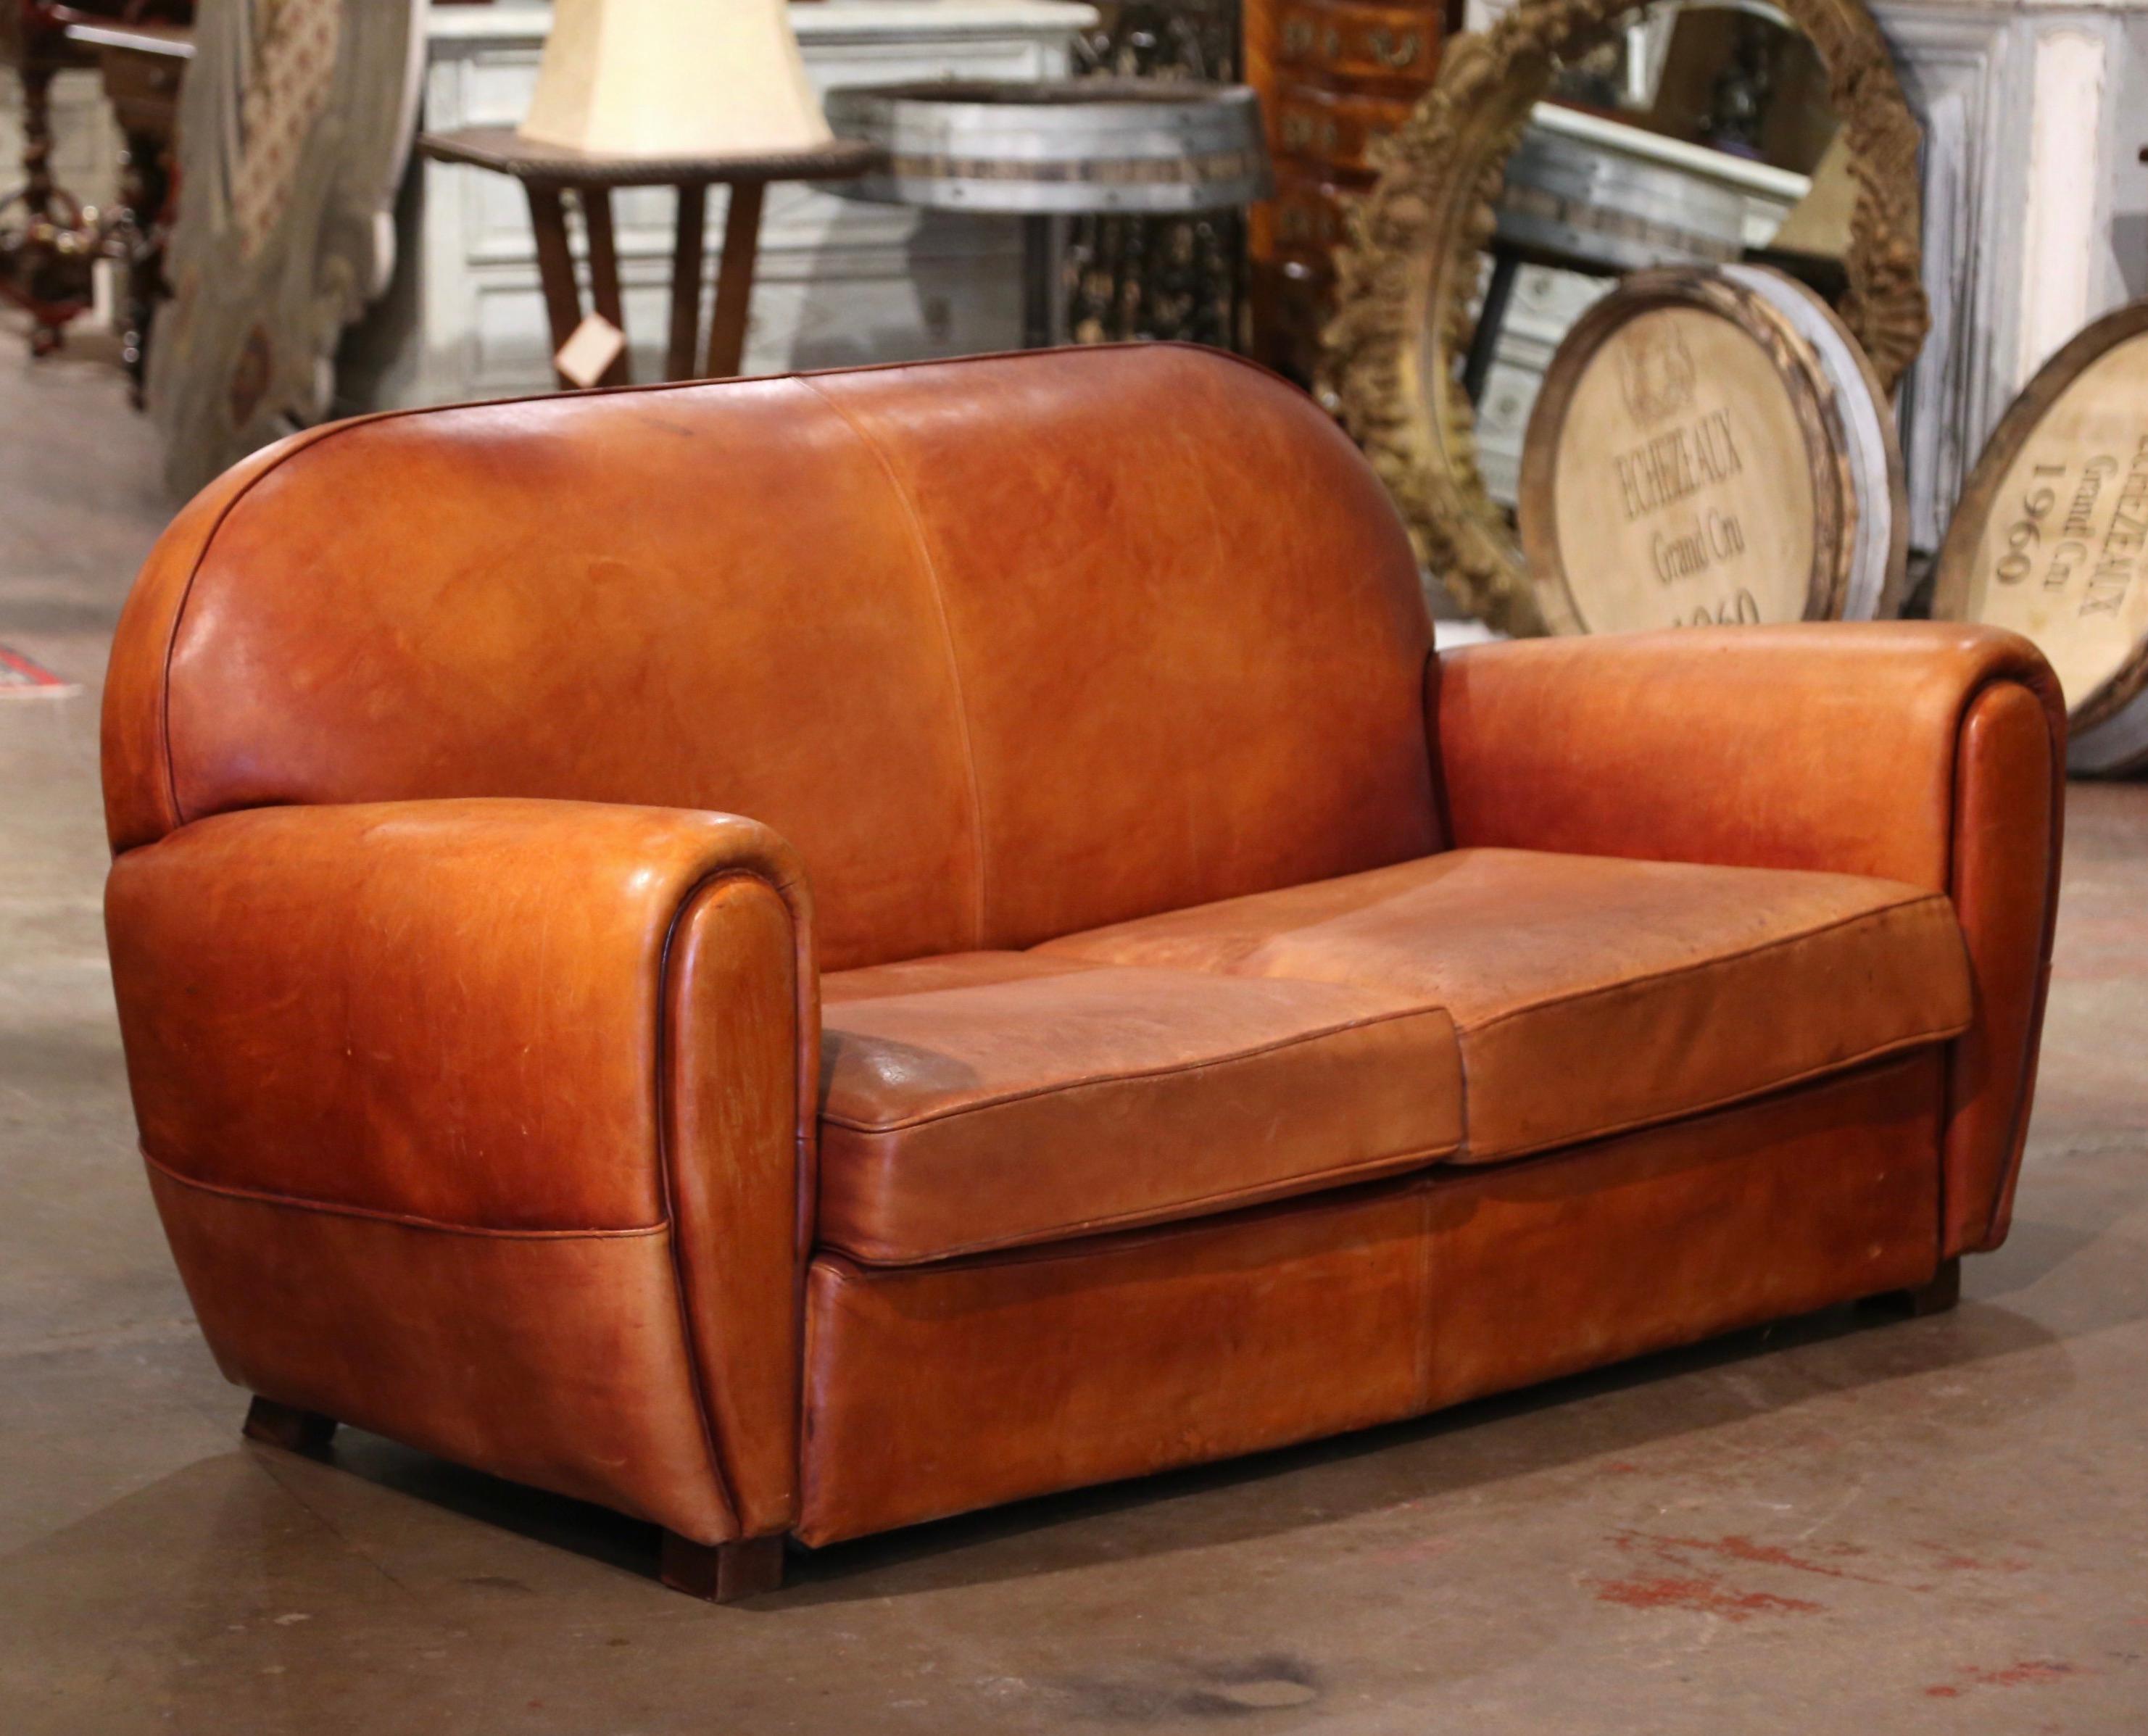 This Classic, antique Art Deco club sofa was crafted in France, circa 1920. This stately couch features wide, rounded armrests, a pitch back with an arched top shape, and square feet covered with leather at the base. The Classic, masculine French